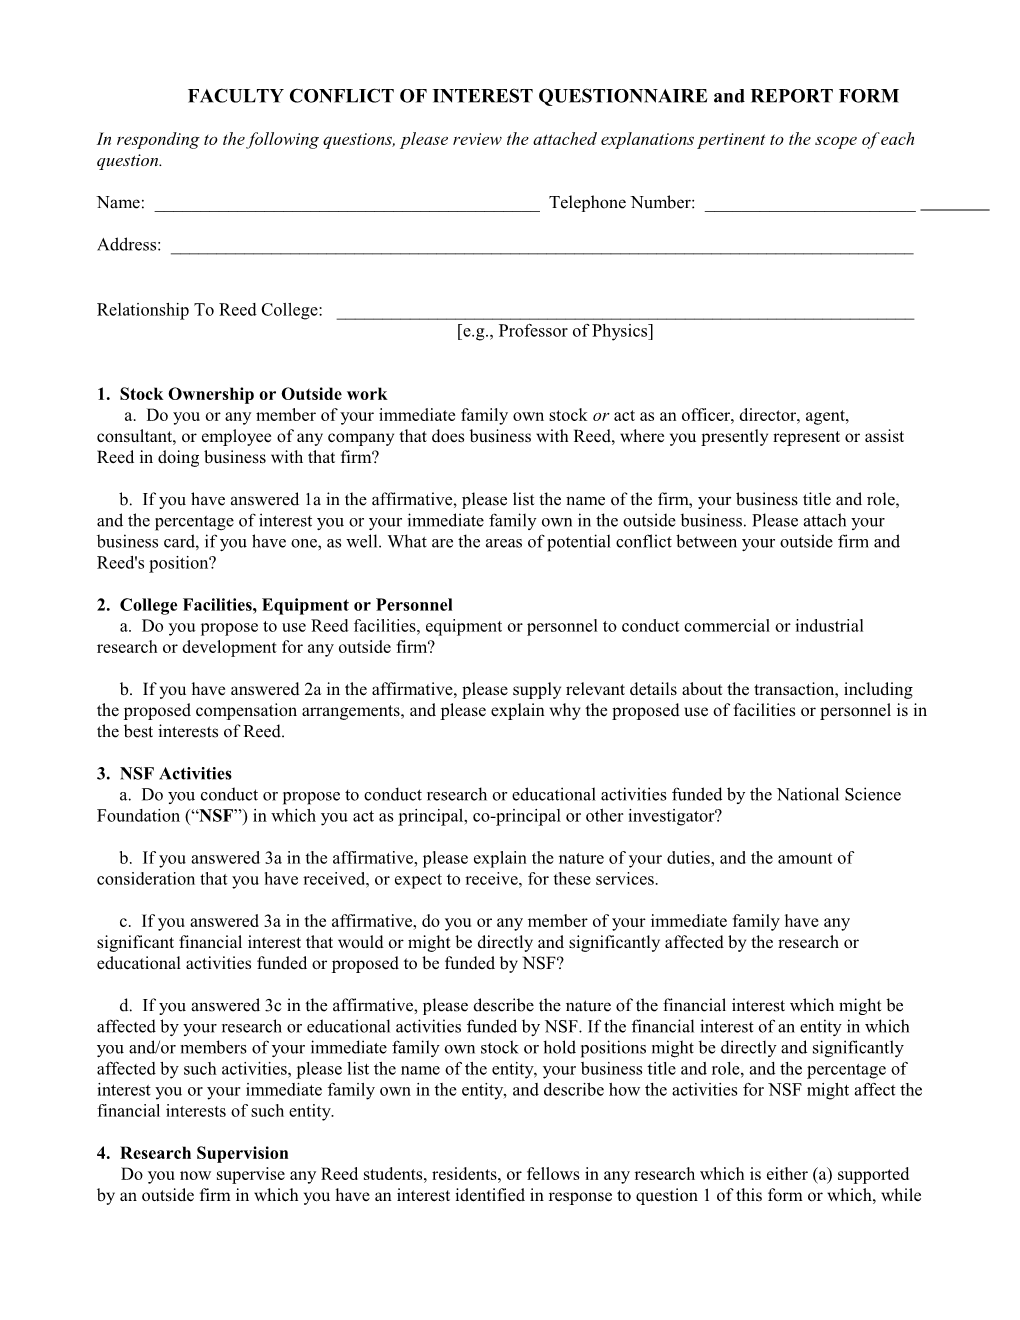 FACULTY CONFLICT of INTEREST QUESTIONNAIRE and REPORT FORM